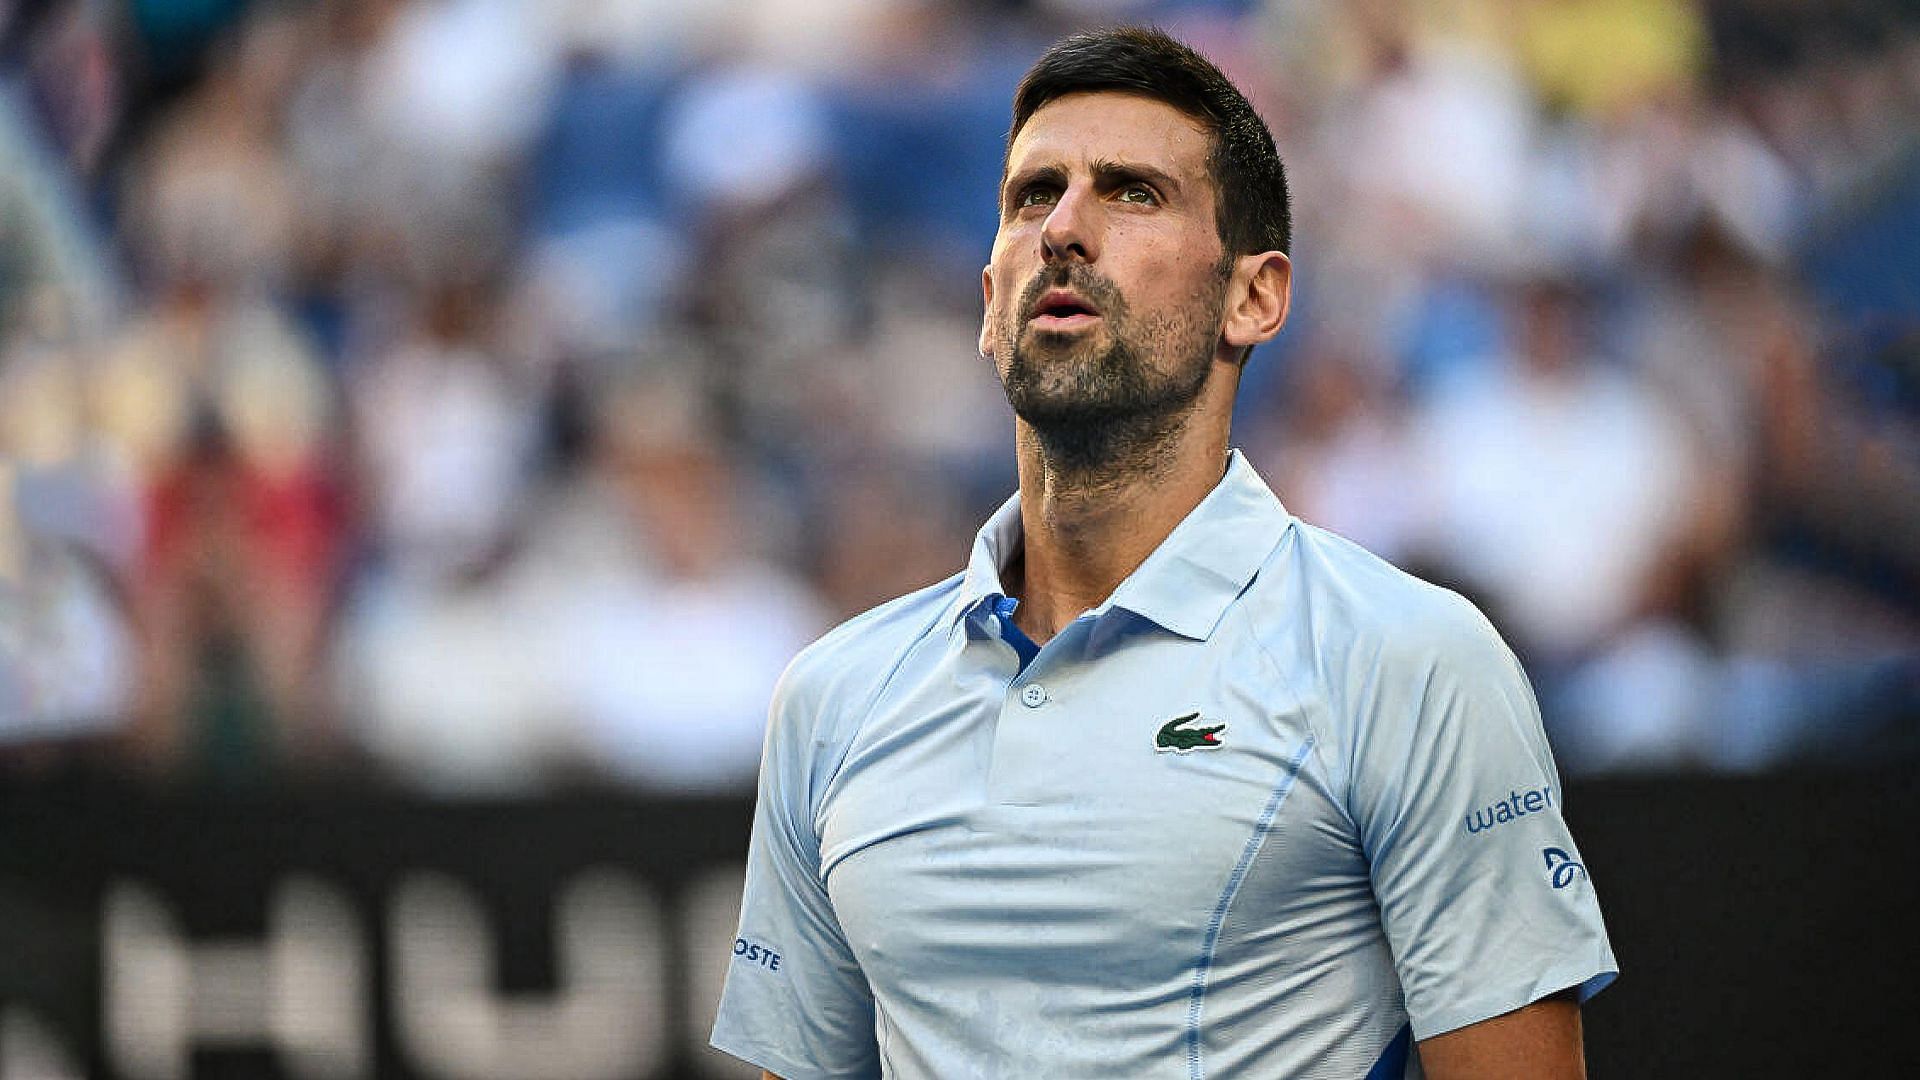 5 instances when Novak Djokovic suffered unexpected early exits at Grand Slams 